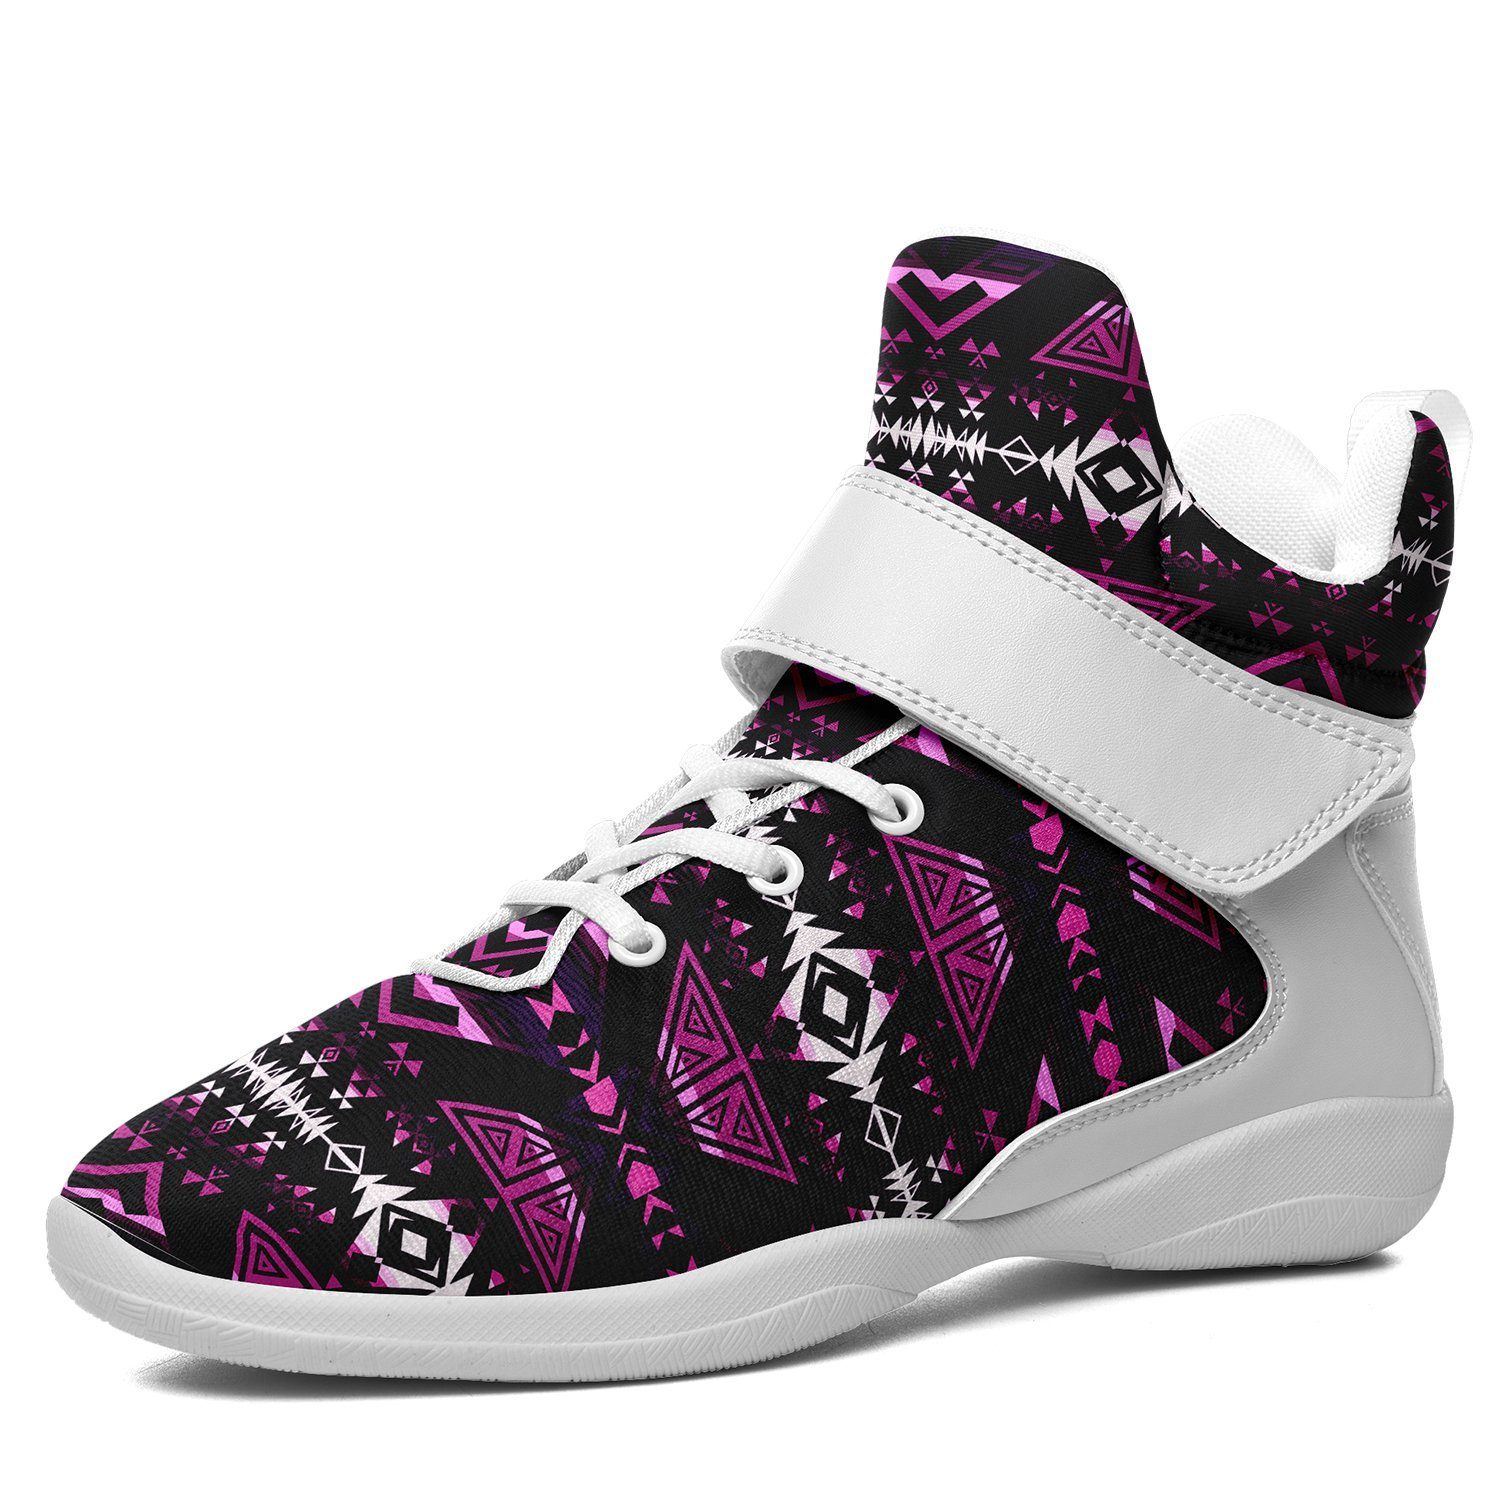 Upstream Expedition Moonlight Shadows Ipottaa Basketball / Sport High Top Shoes - White Sole 49 Dzine US Men 7 / EUR 40 White Sole with White Strap 